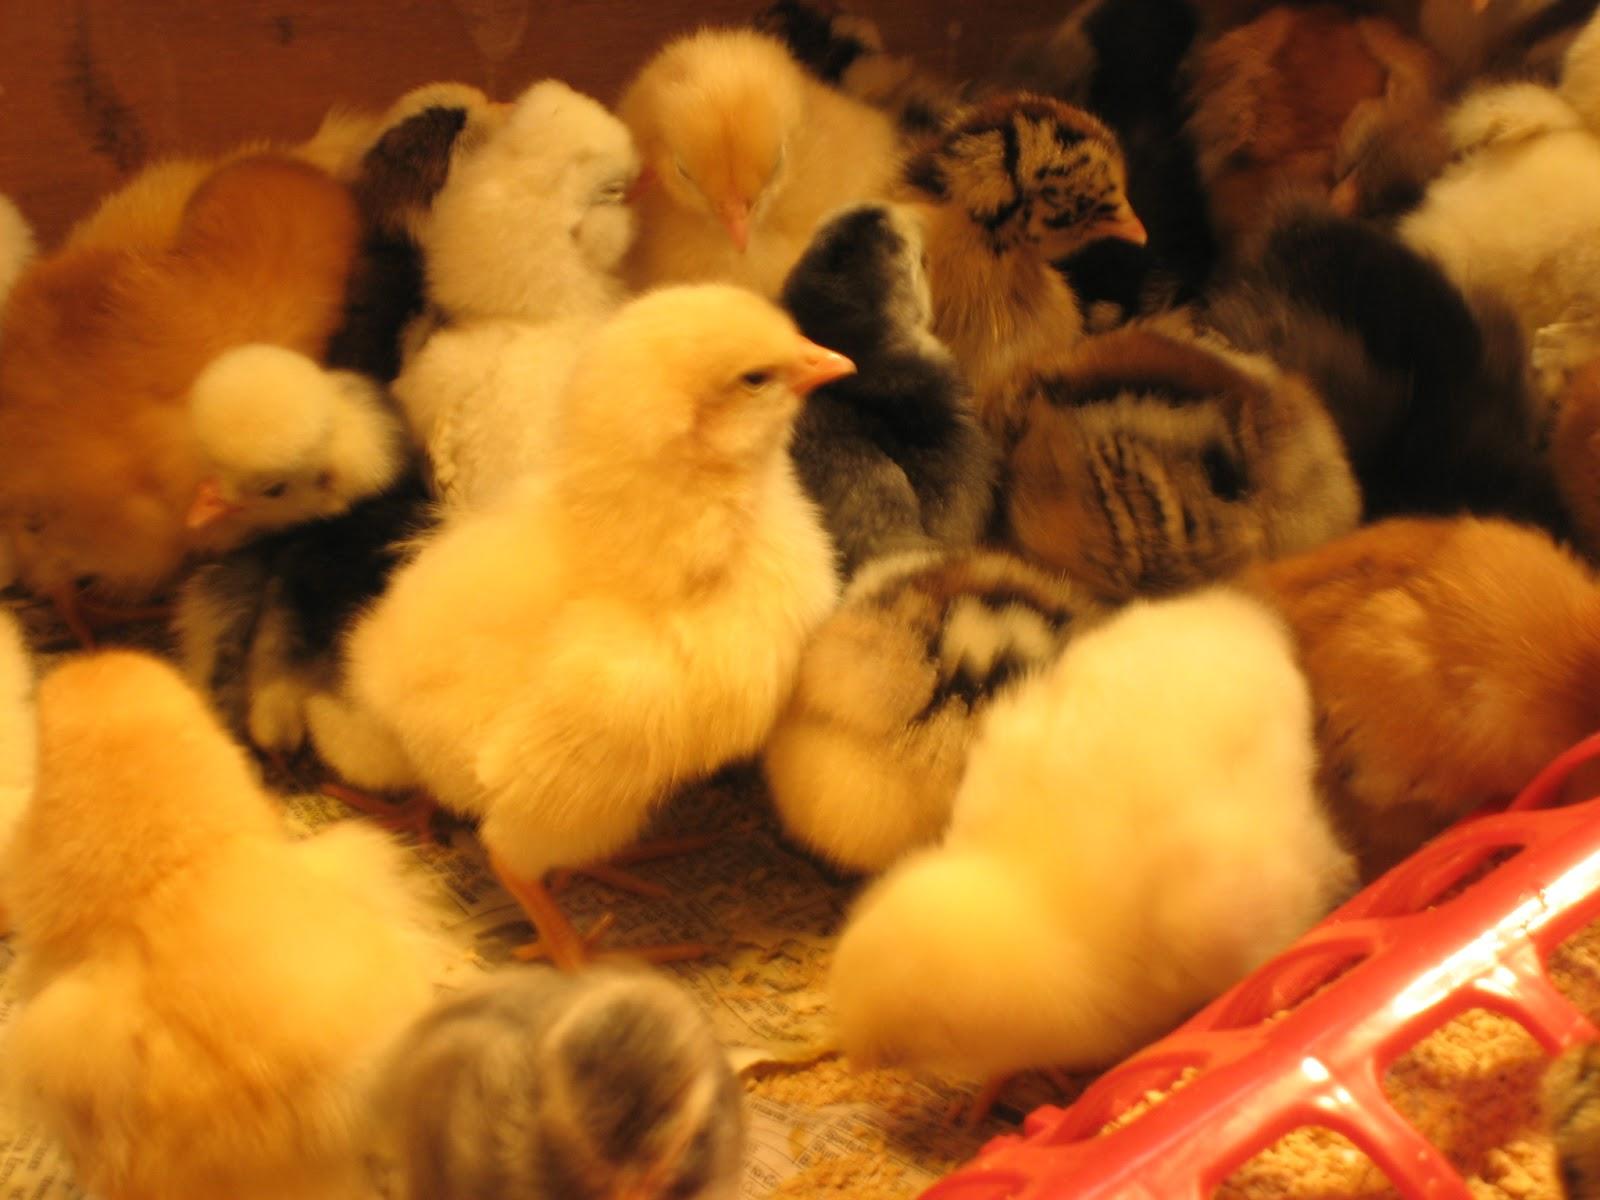 The 7 Best Tips About Hatch Your Own Chicks